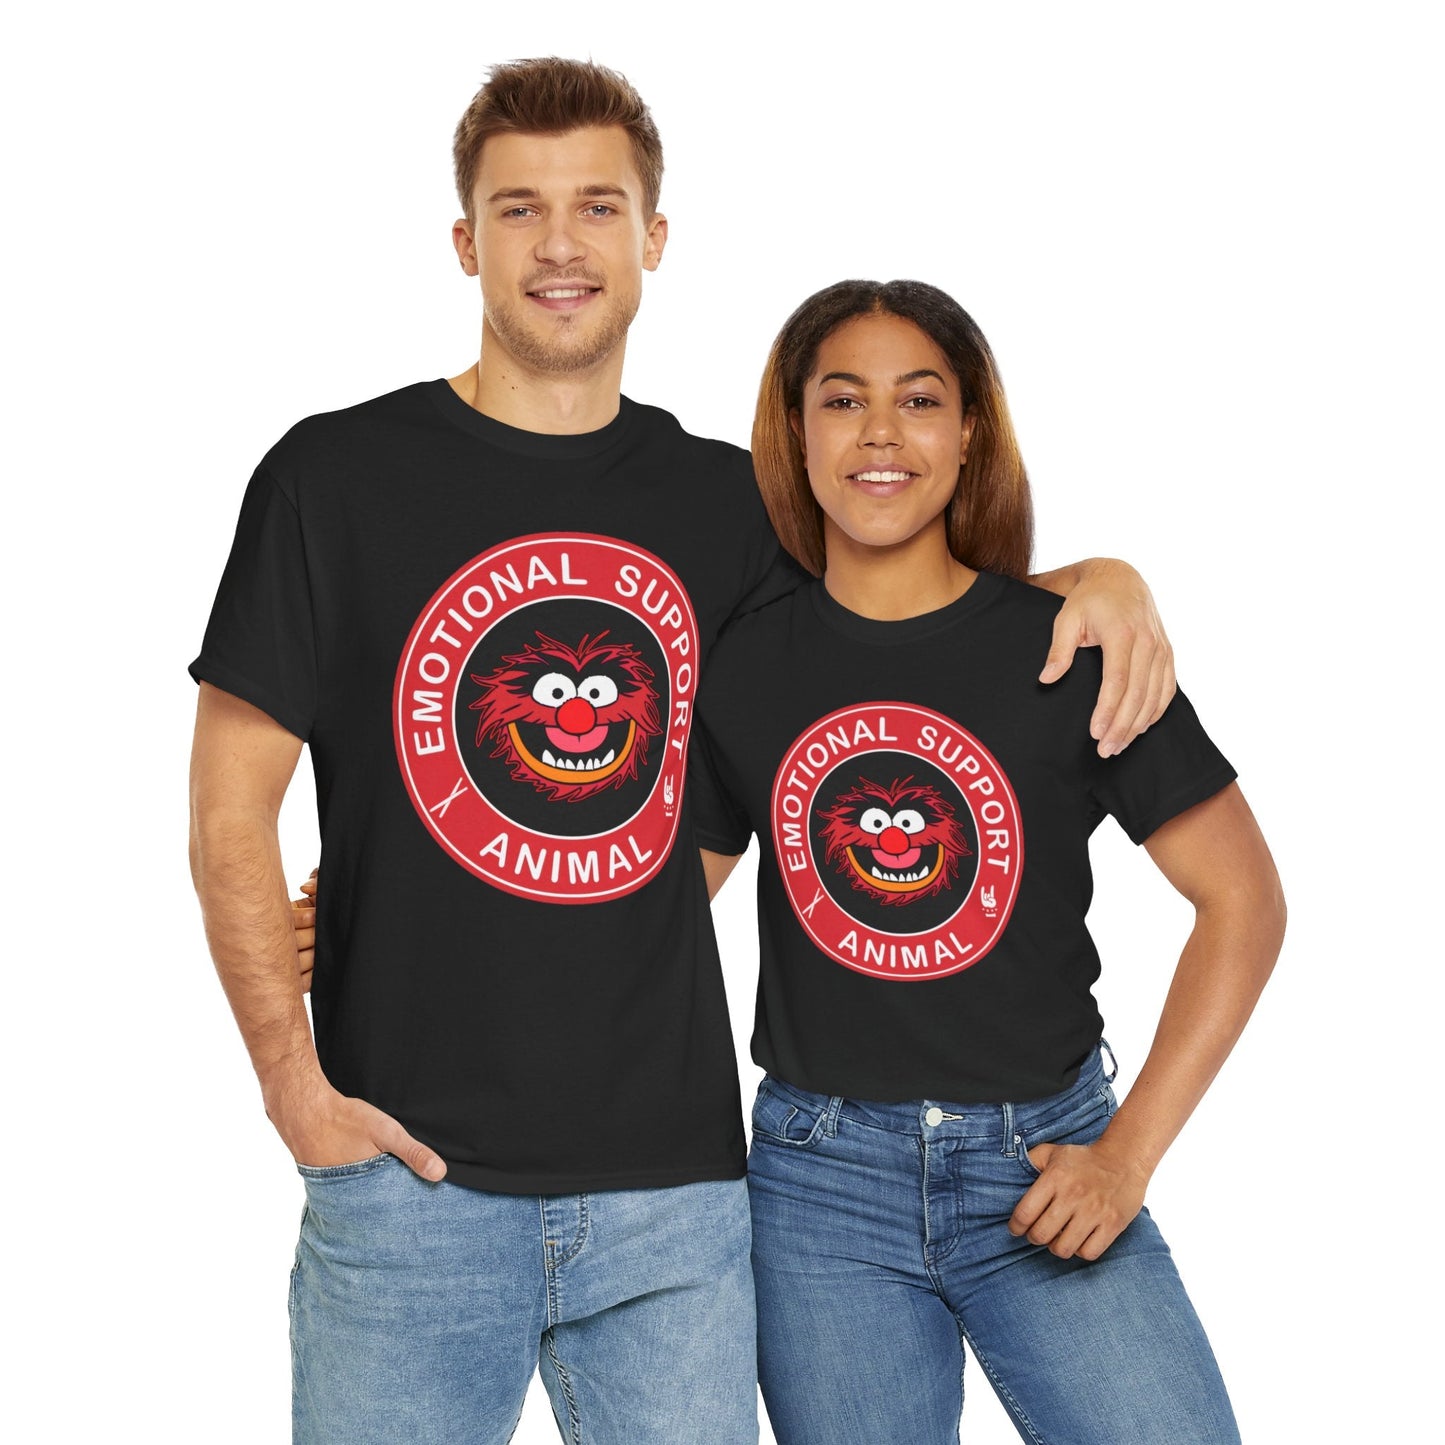 Muppets Emotional Support Animal T-Shirt - RetroTeeShop